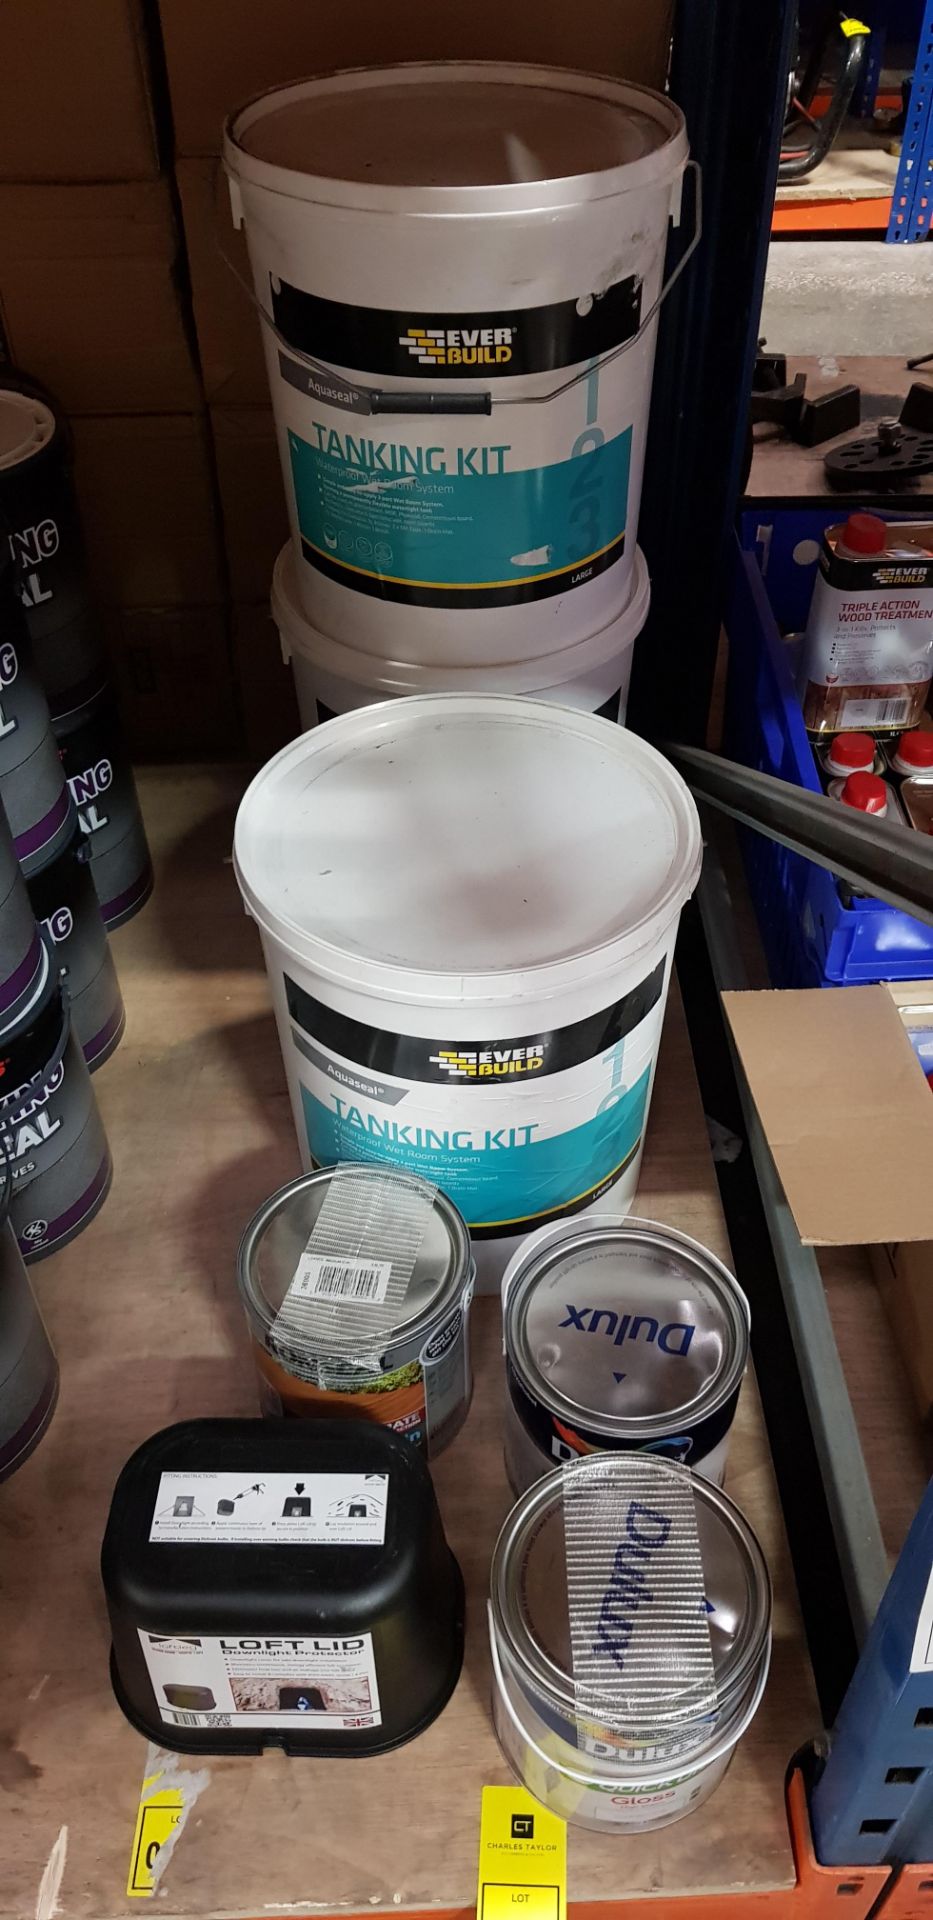 6 PIECE MIXED LOT CONTAINING 3 X EVER BUILD TANKING KIT WATERPROOF WET PROOF SYSTEM, 1 X DULUX